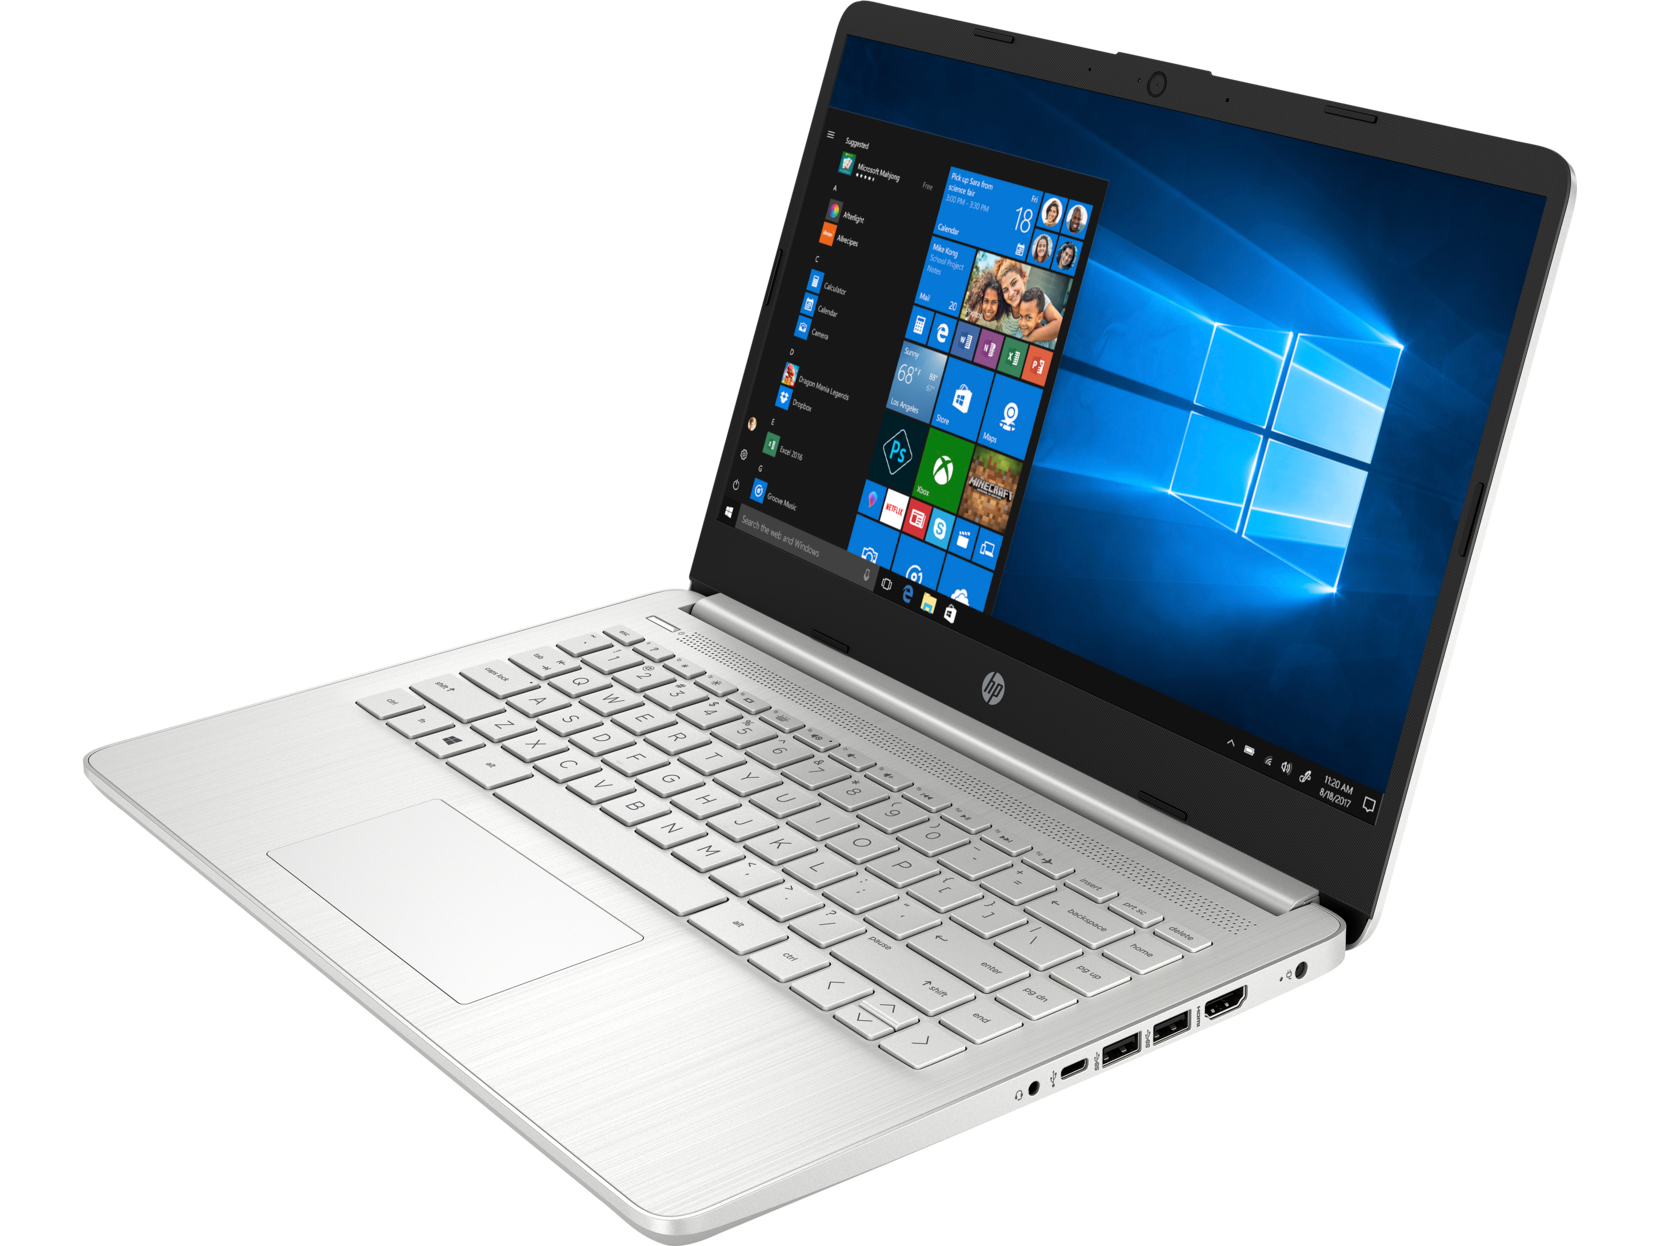  Notebook Hp 14 dq1004la I5 1035gi 14 8 256gb Systematic